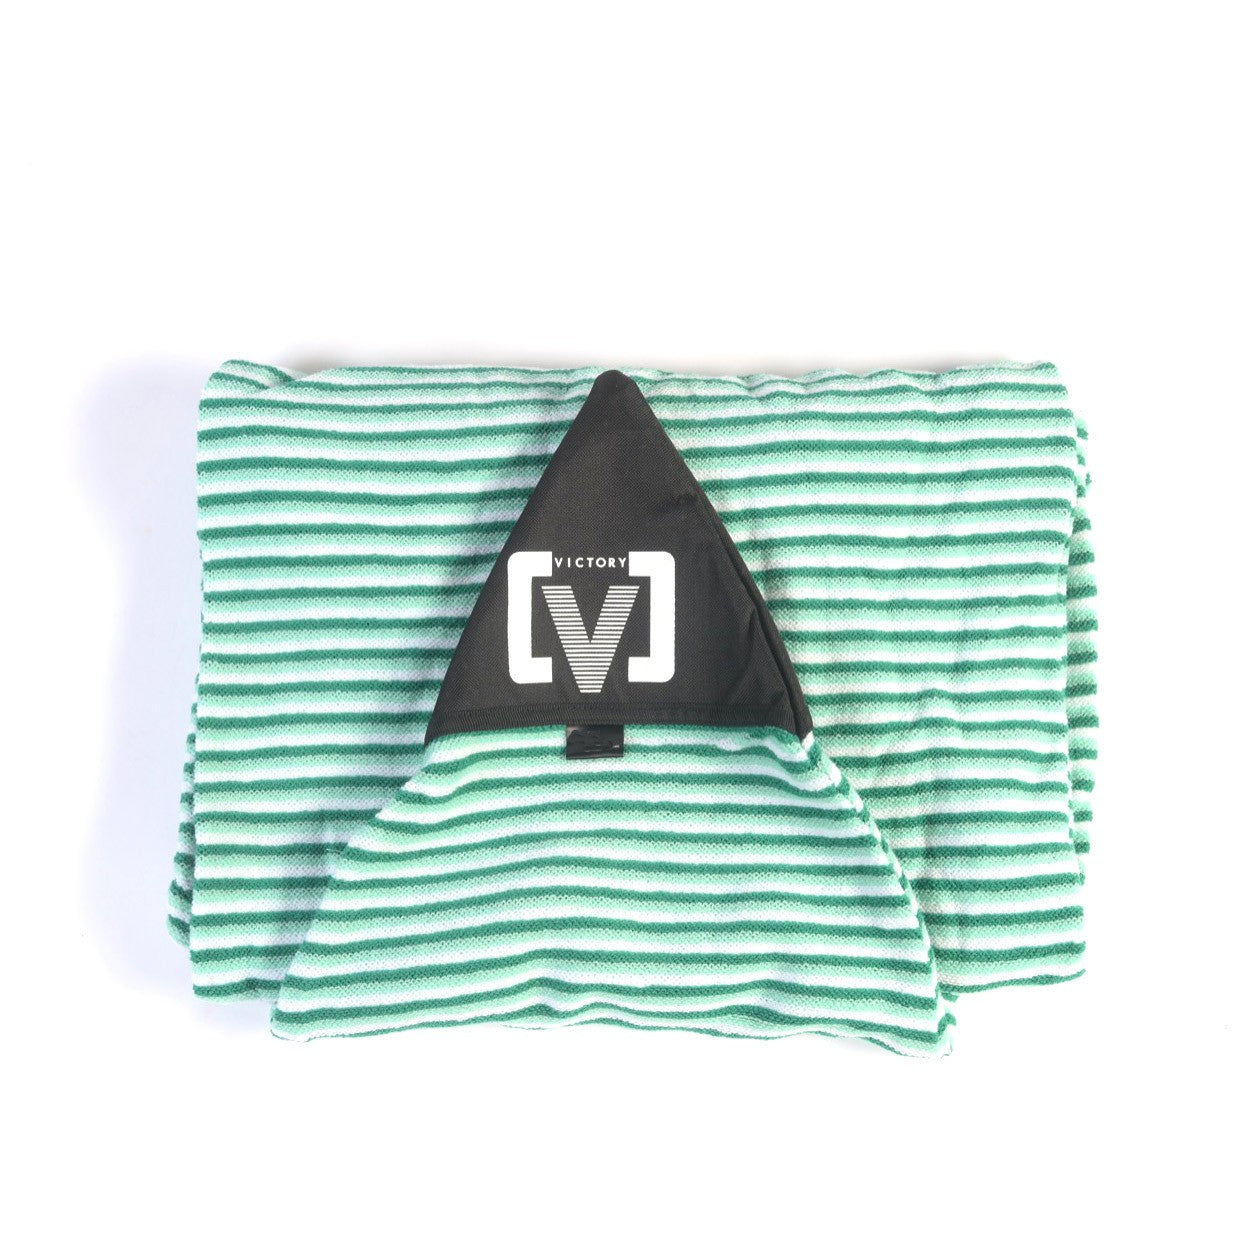 VICTORY - Surf Sock Cover - Shortboard - 6'10 - Green / White